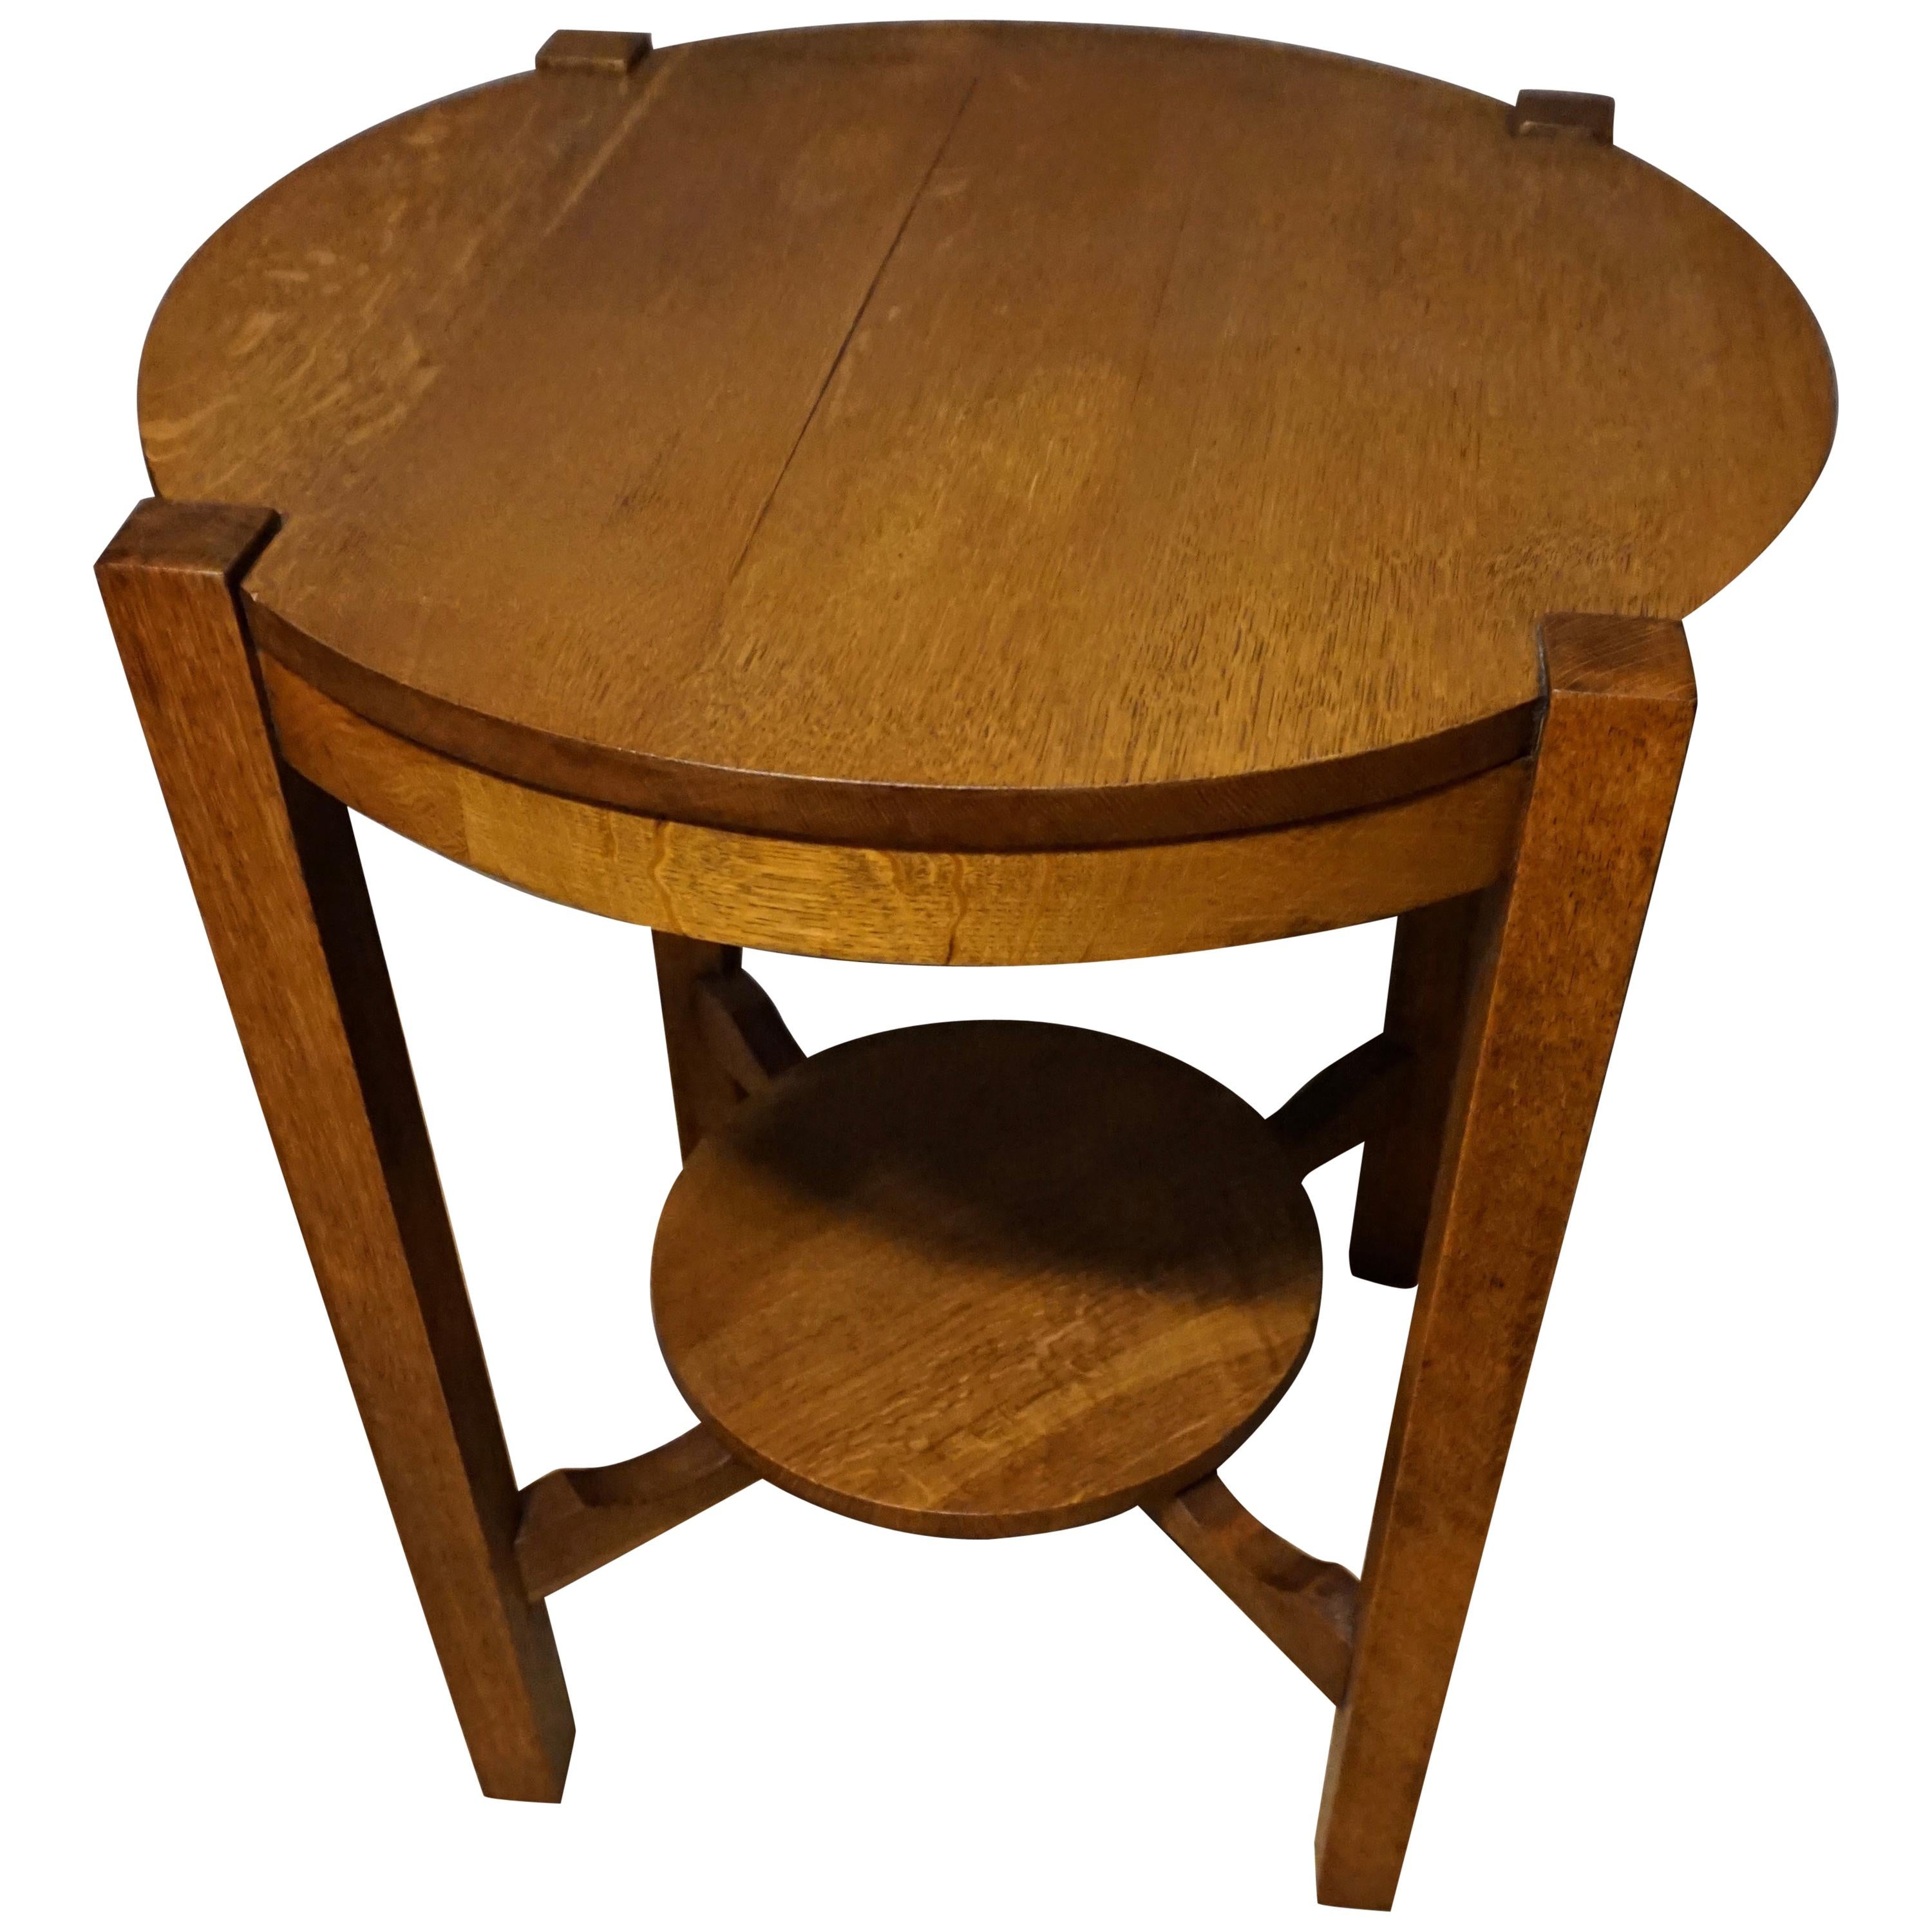 Rare Clean Lined Arts & Crafts Quarter Sawn Oak Round Table with Tier